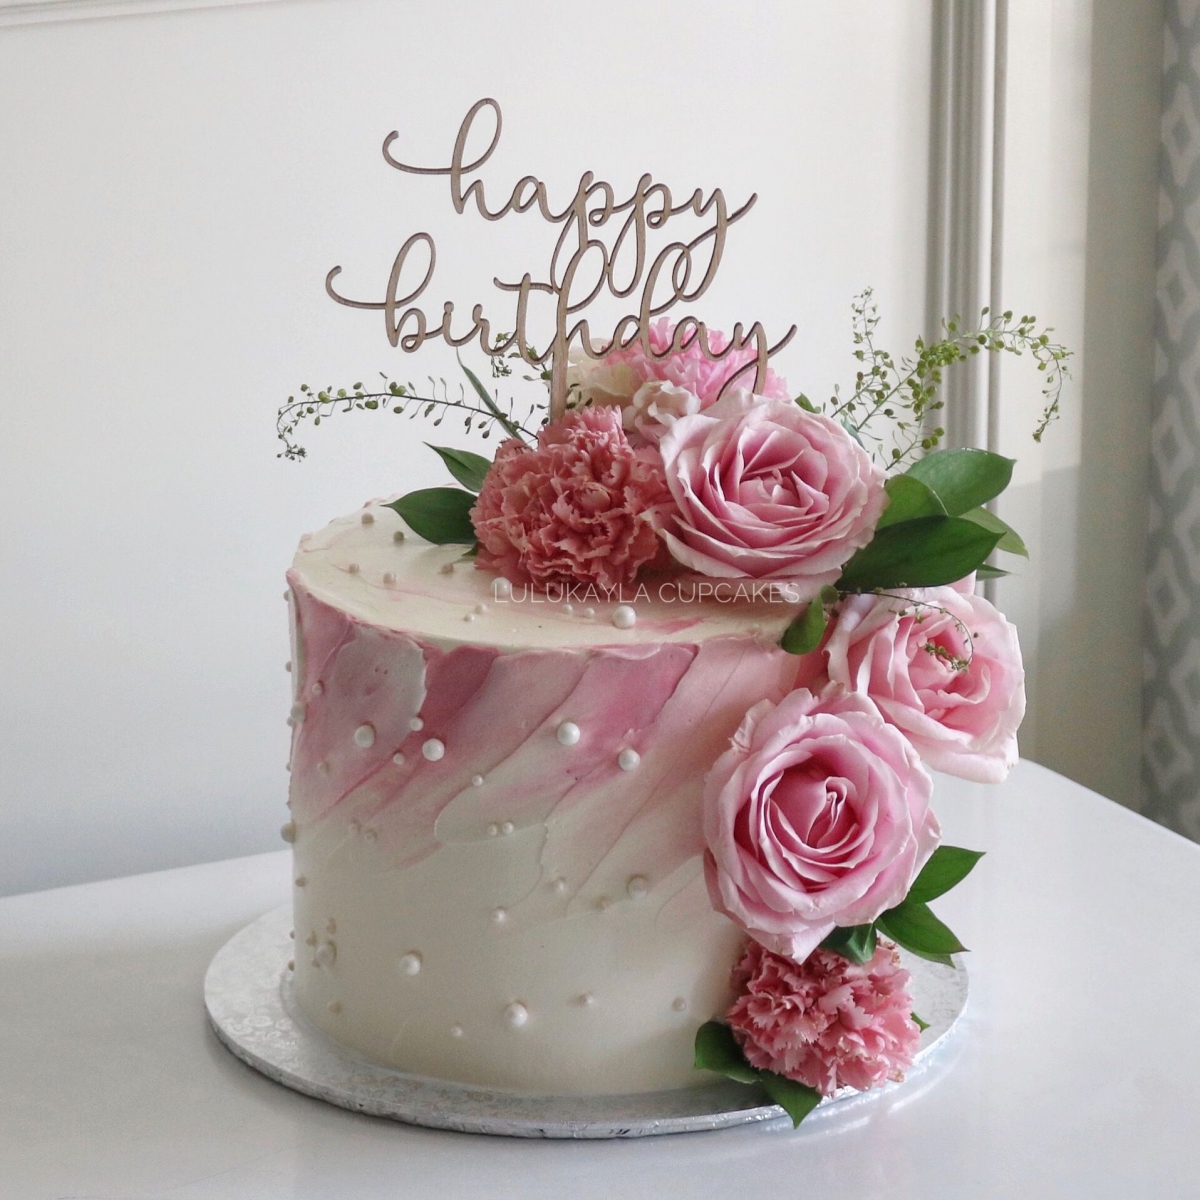 Choose flowers and beautiful birthday cakes for your loved ones